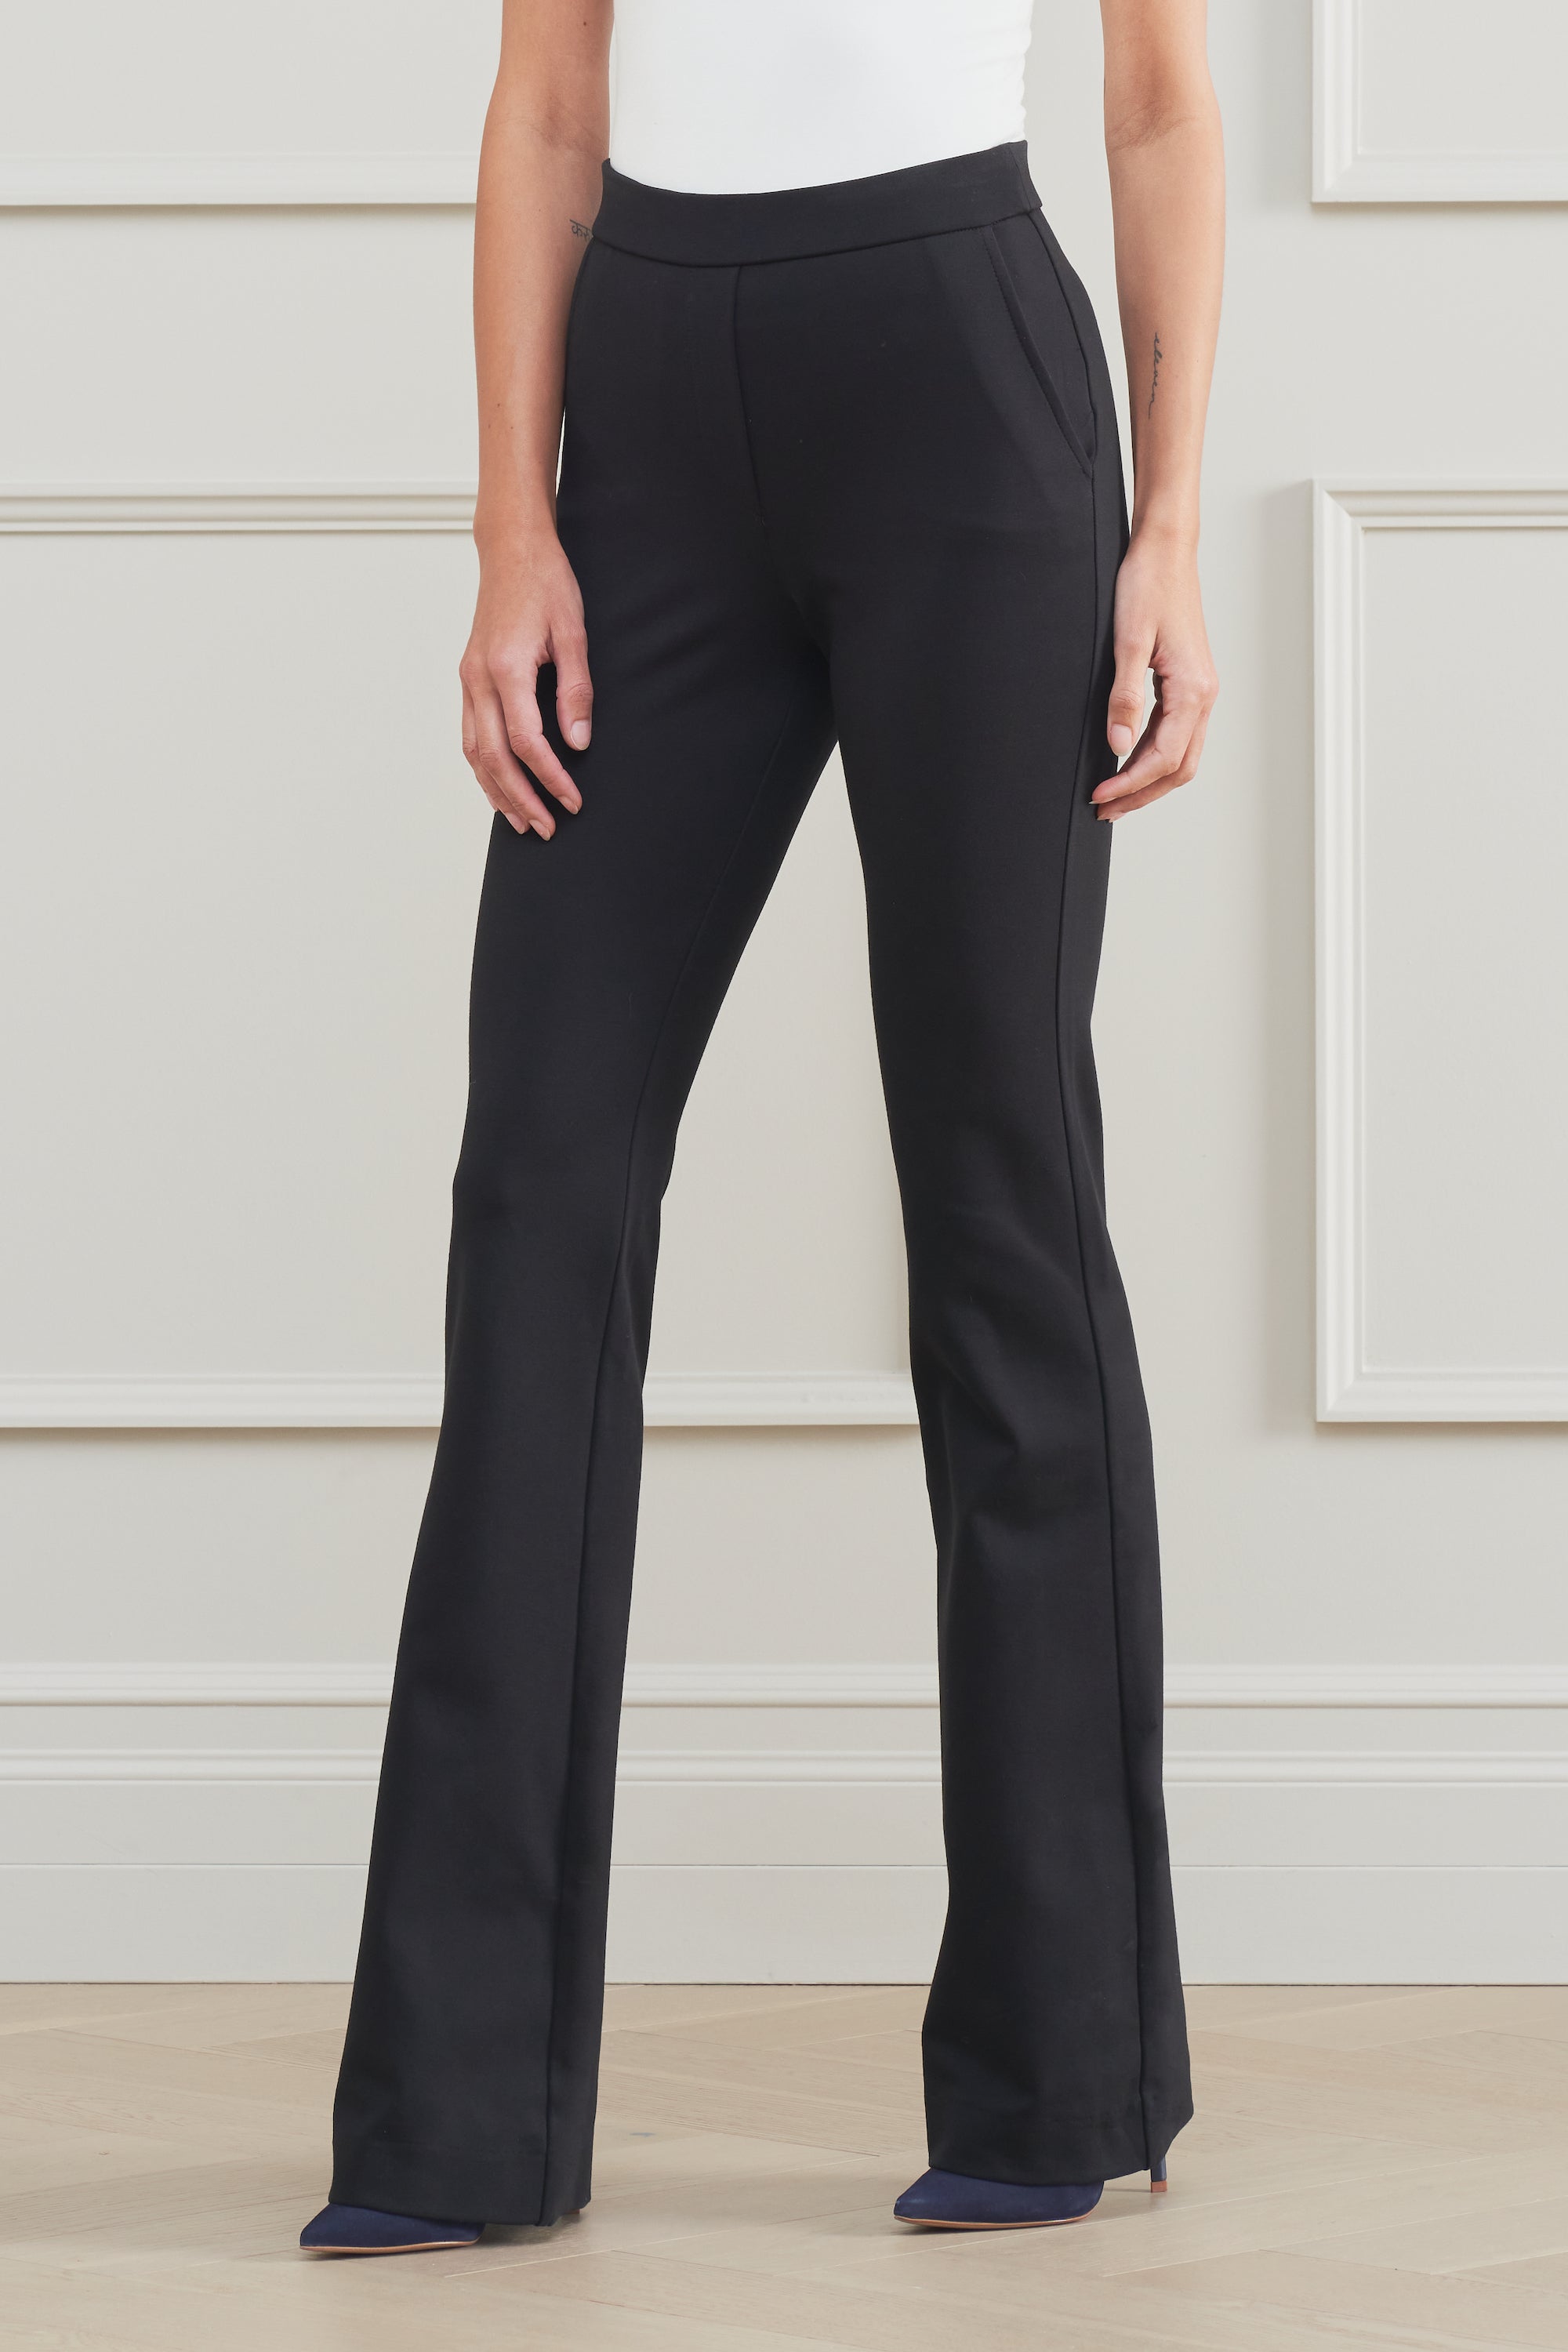 The Dolly Flare Pant